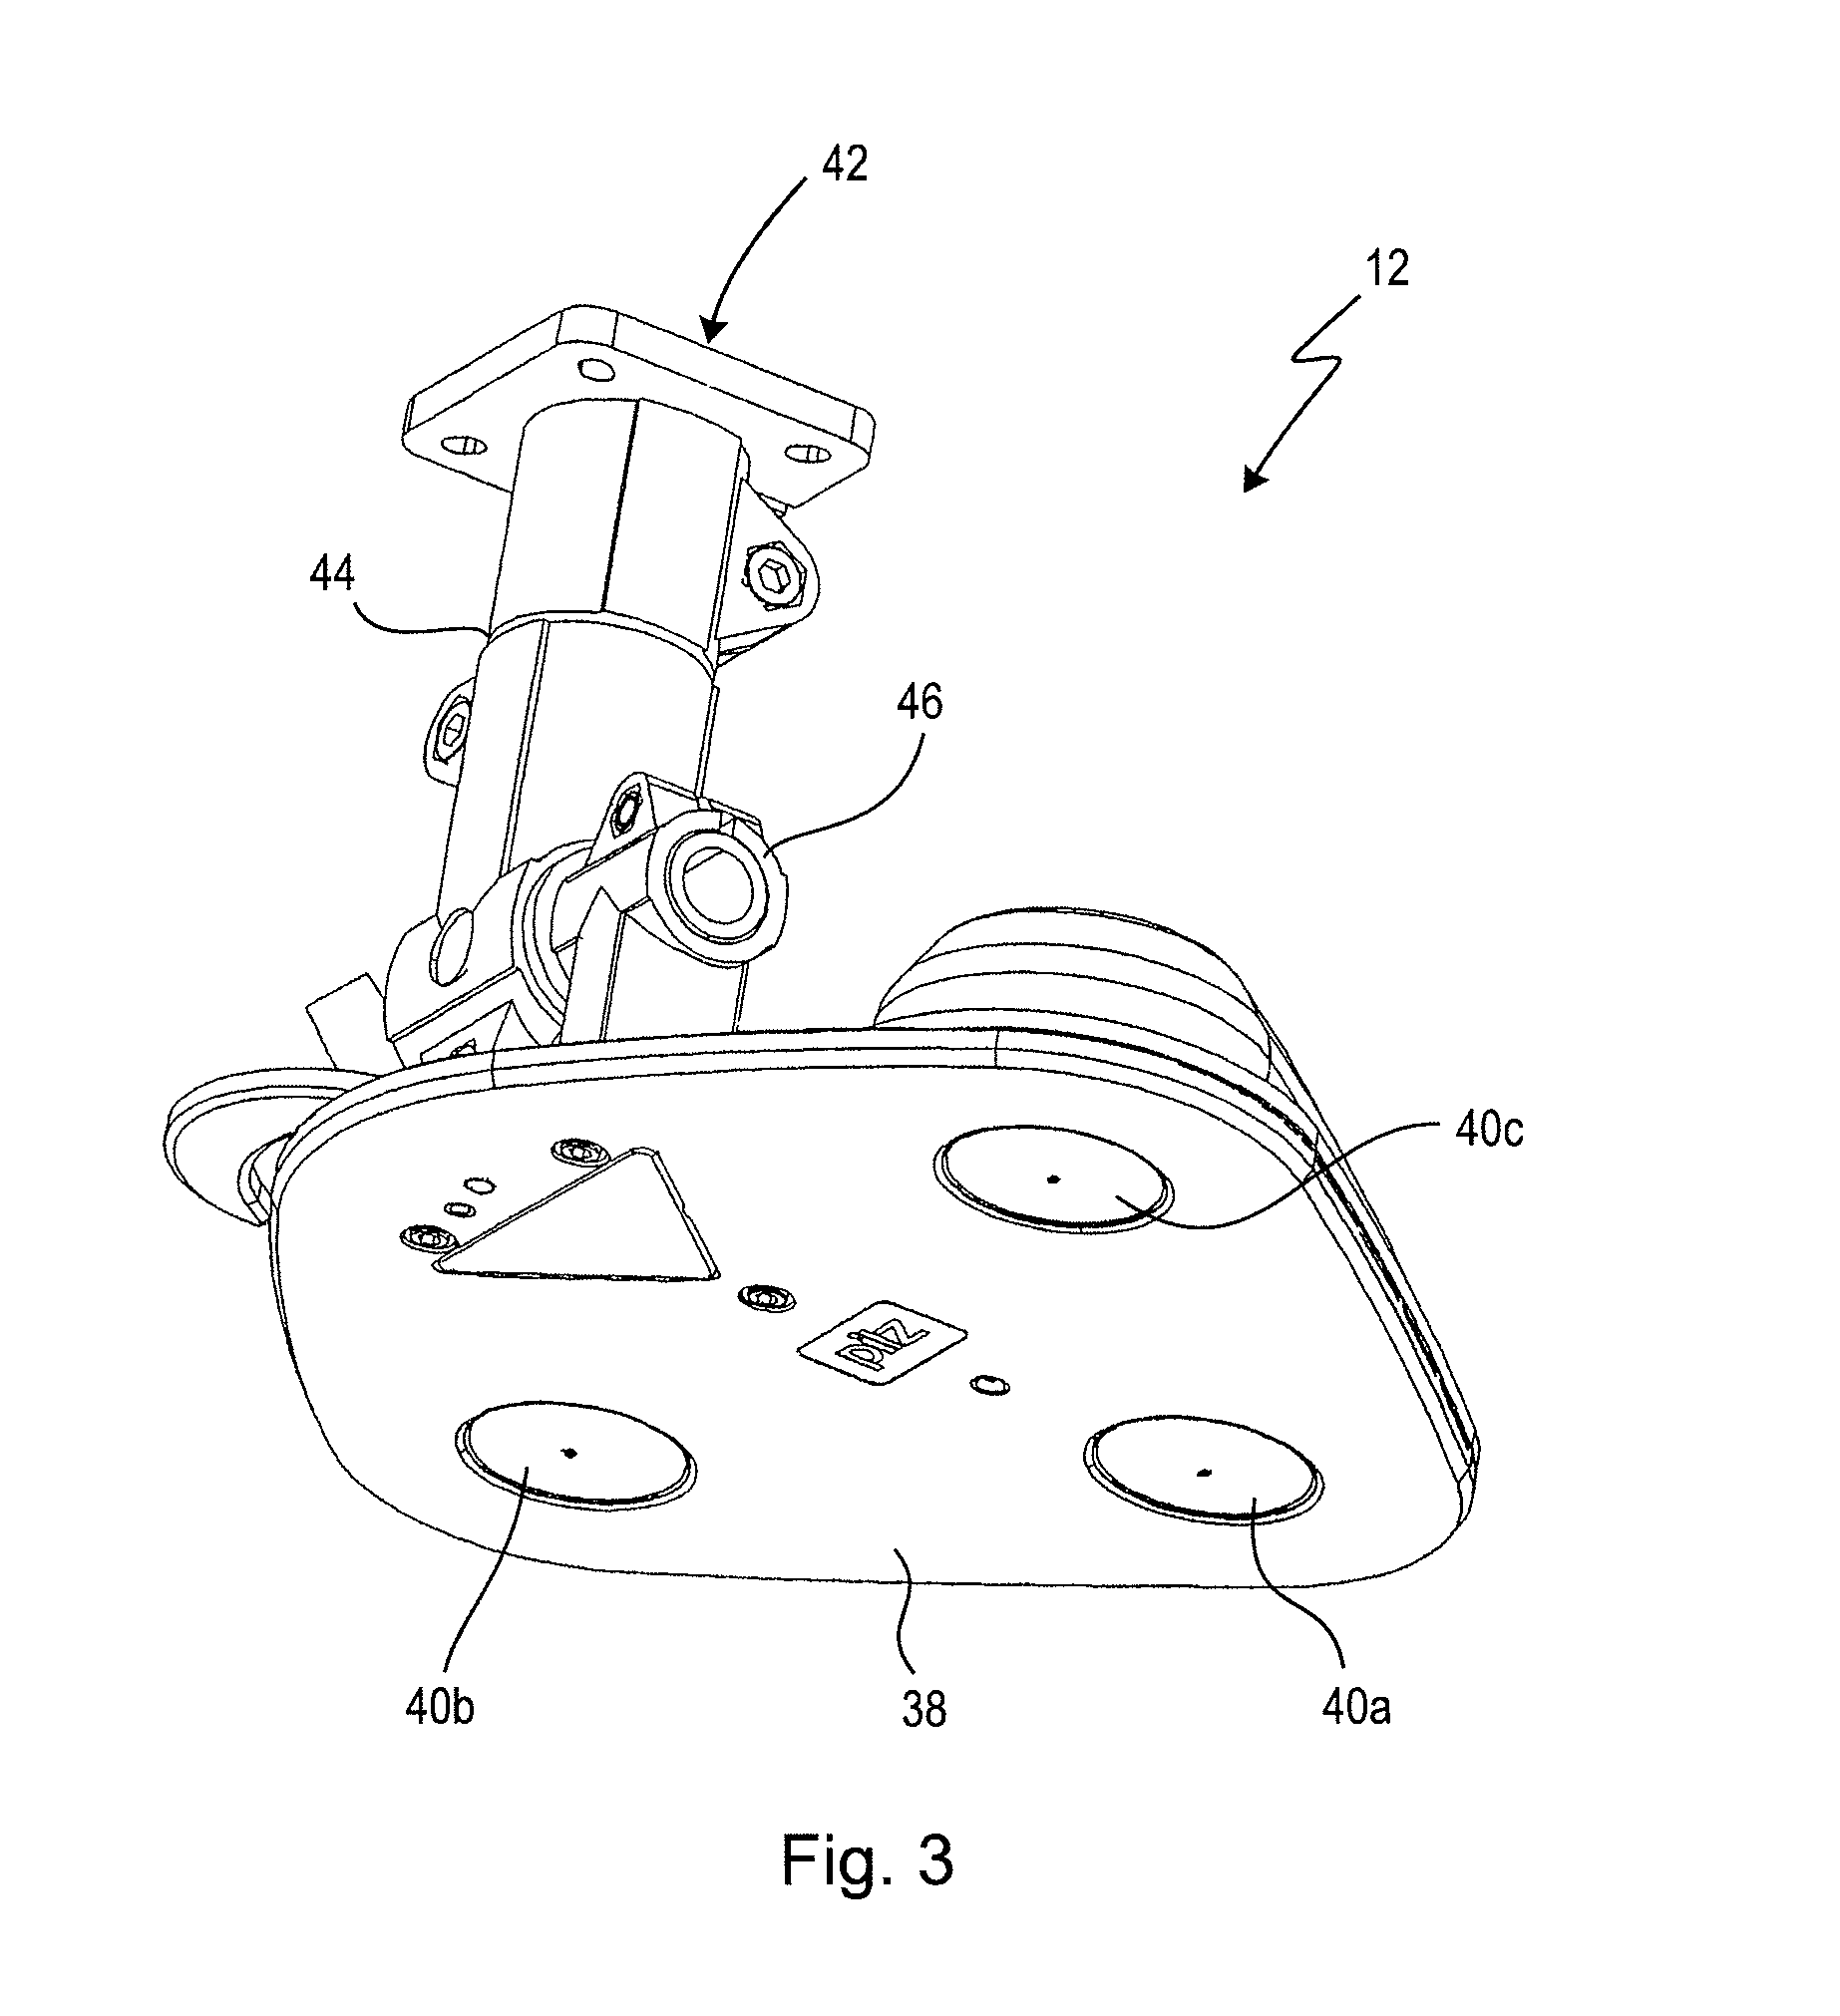 Apparatus and method for safeguarding an automatically operating machine